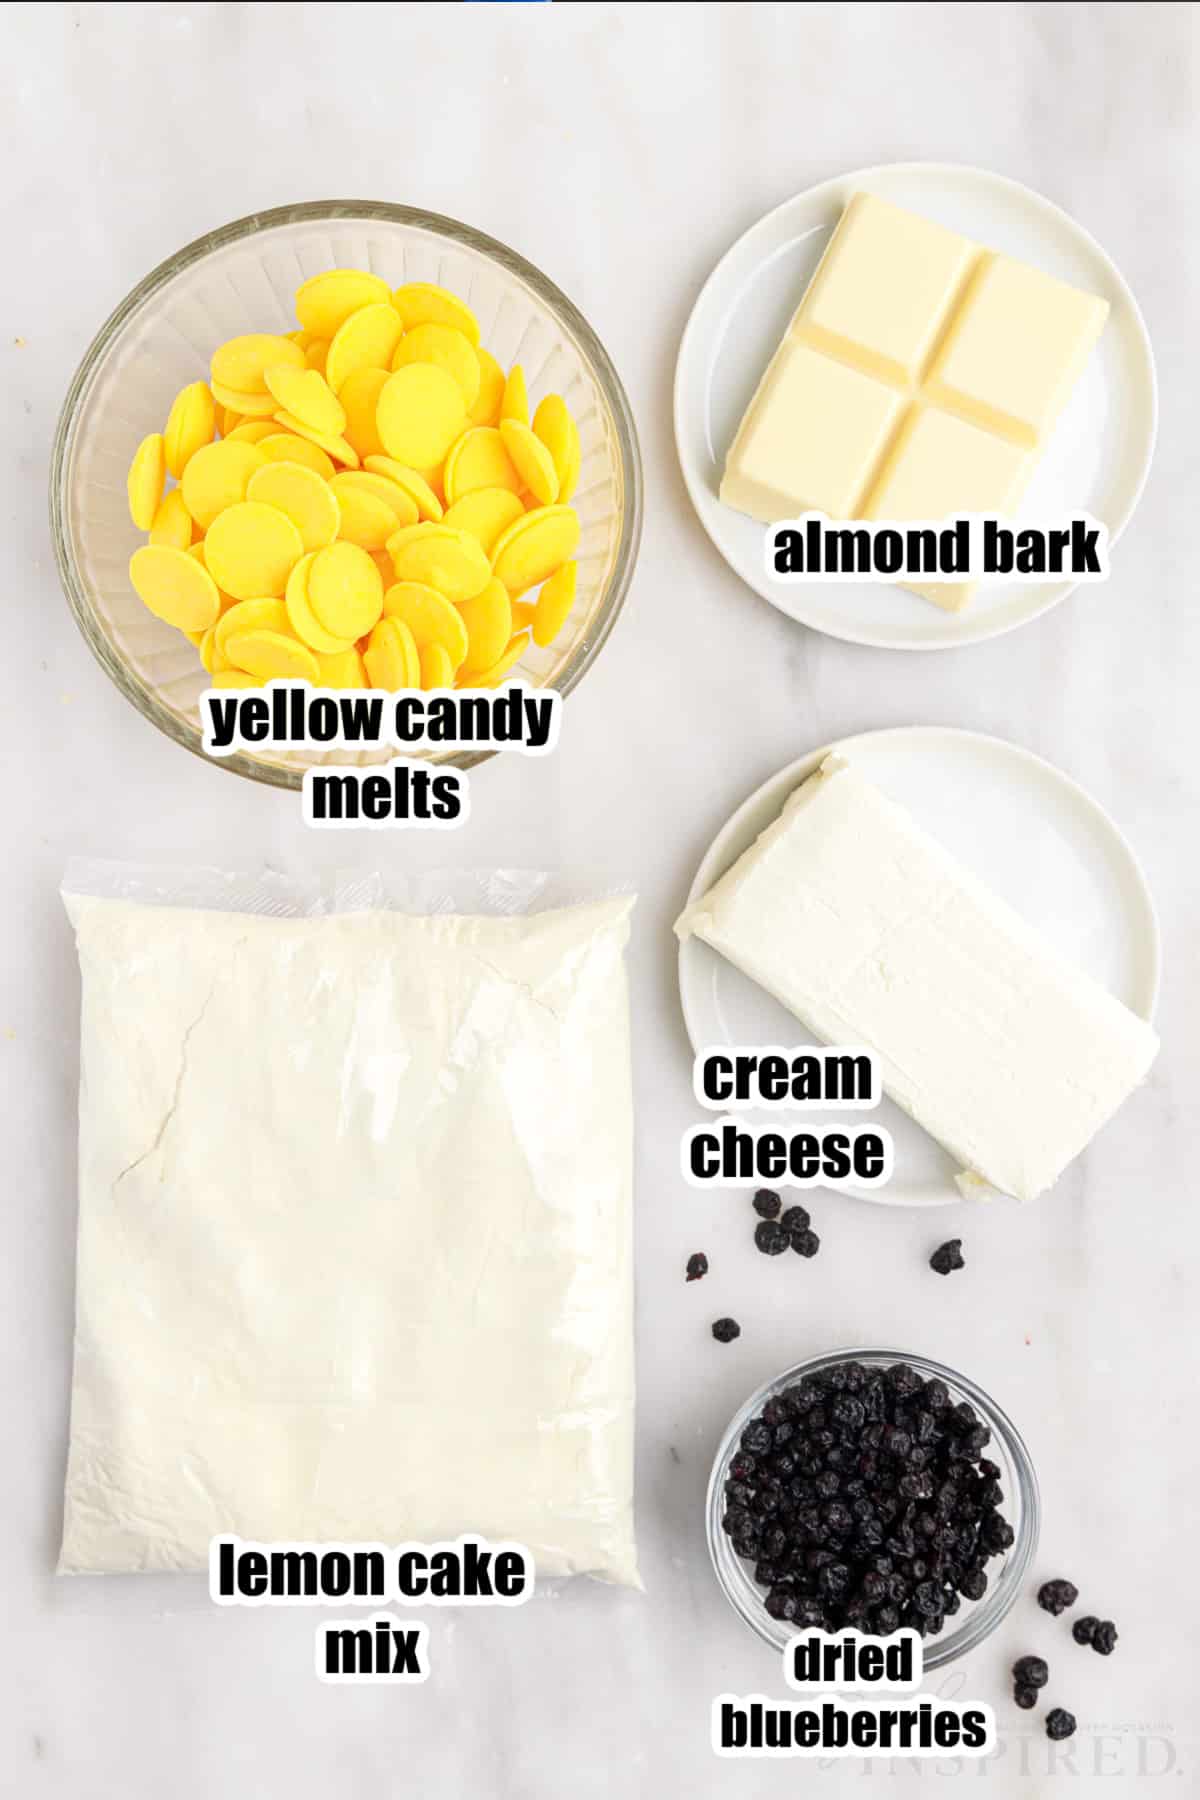 Individual ingredients set out for the lemon blueberry bites.